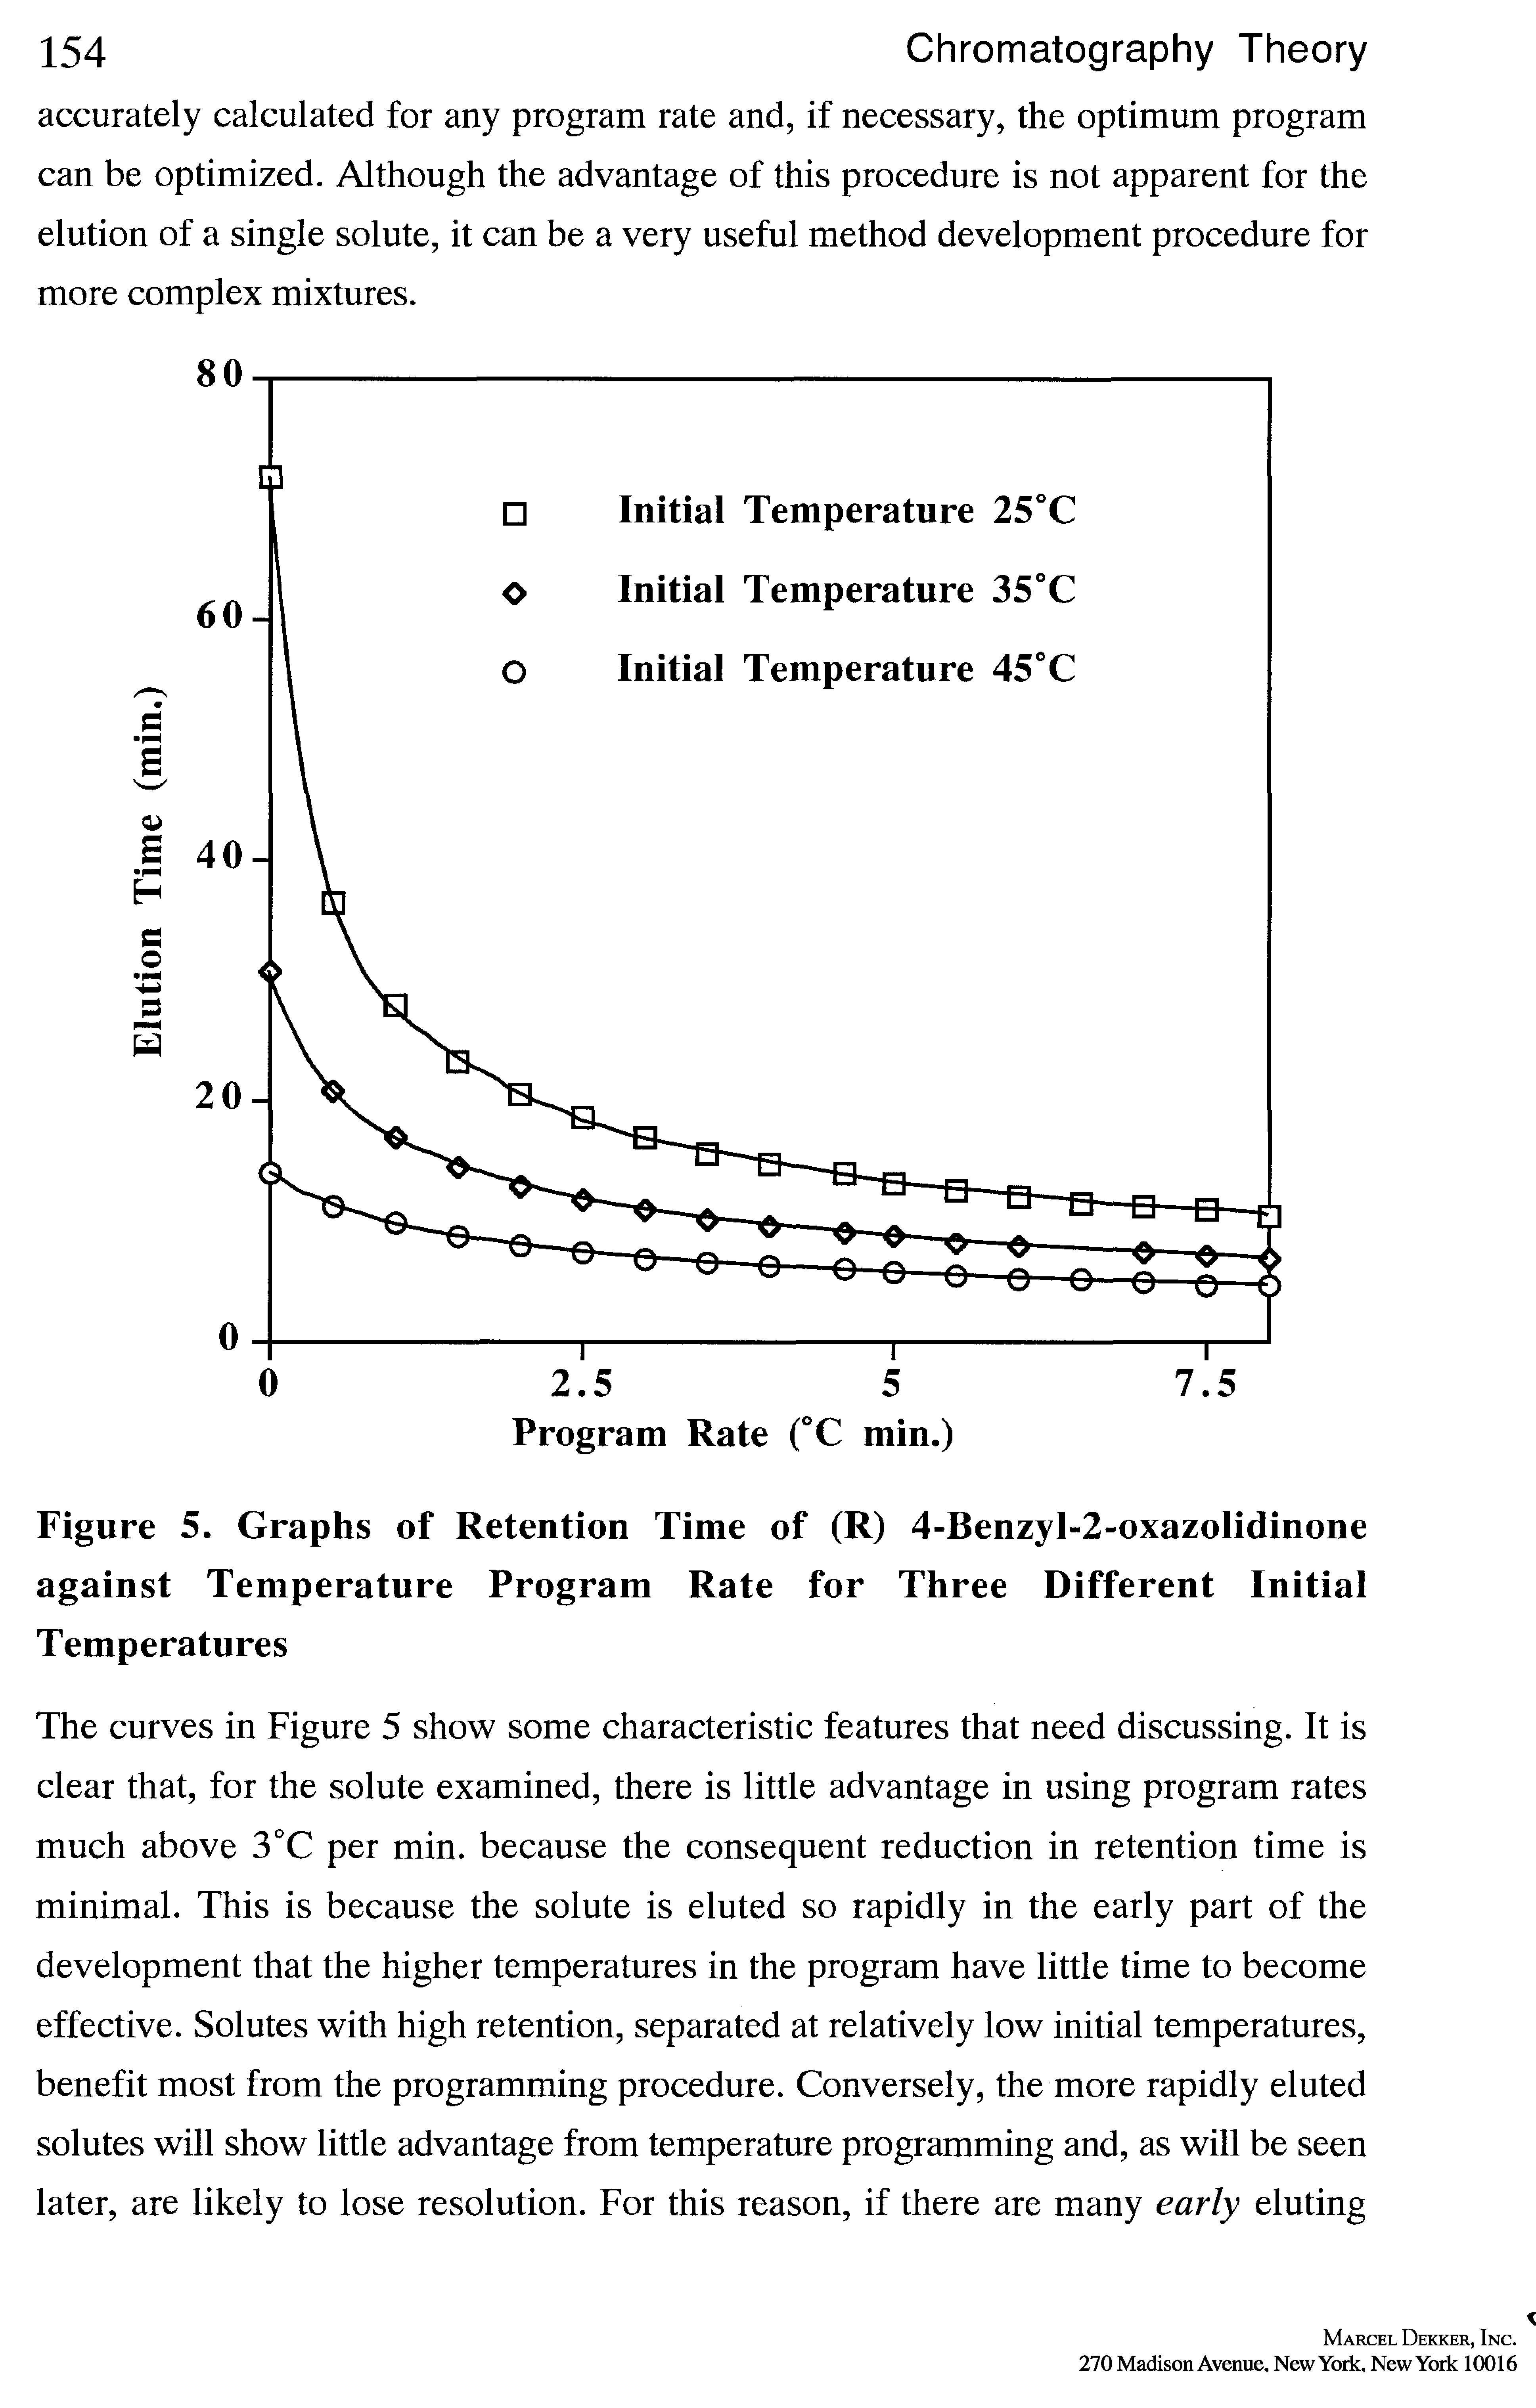 Figure 5. Graphs of Retention Time of (R) 4-Benzyl-2-oxazolidinone against Temperature Program Rate for Three Different Initial Temperatures...